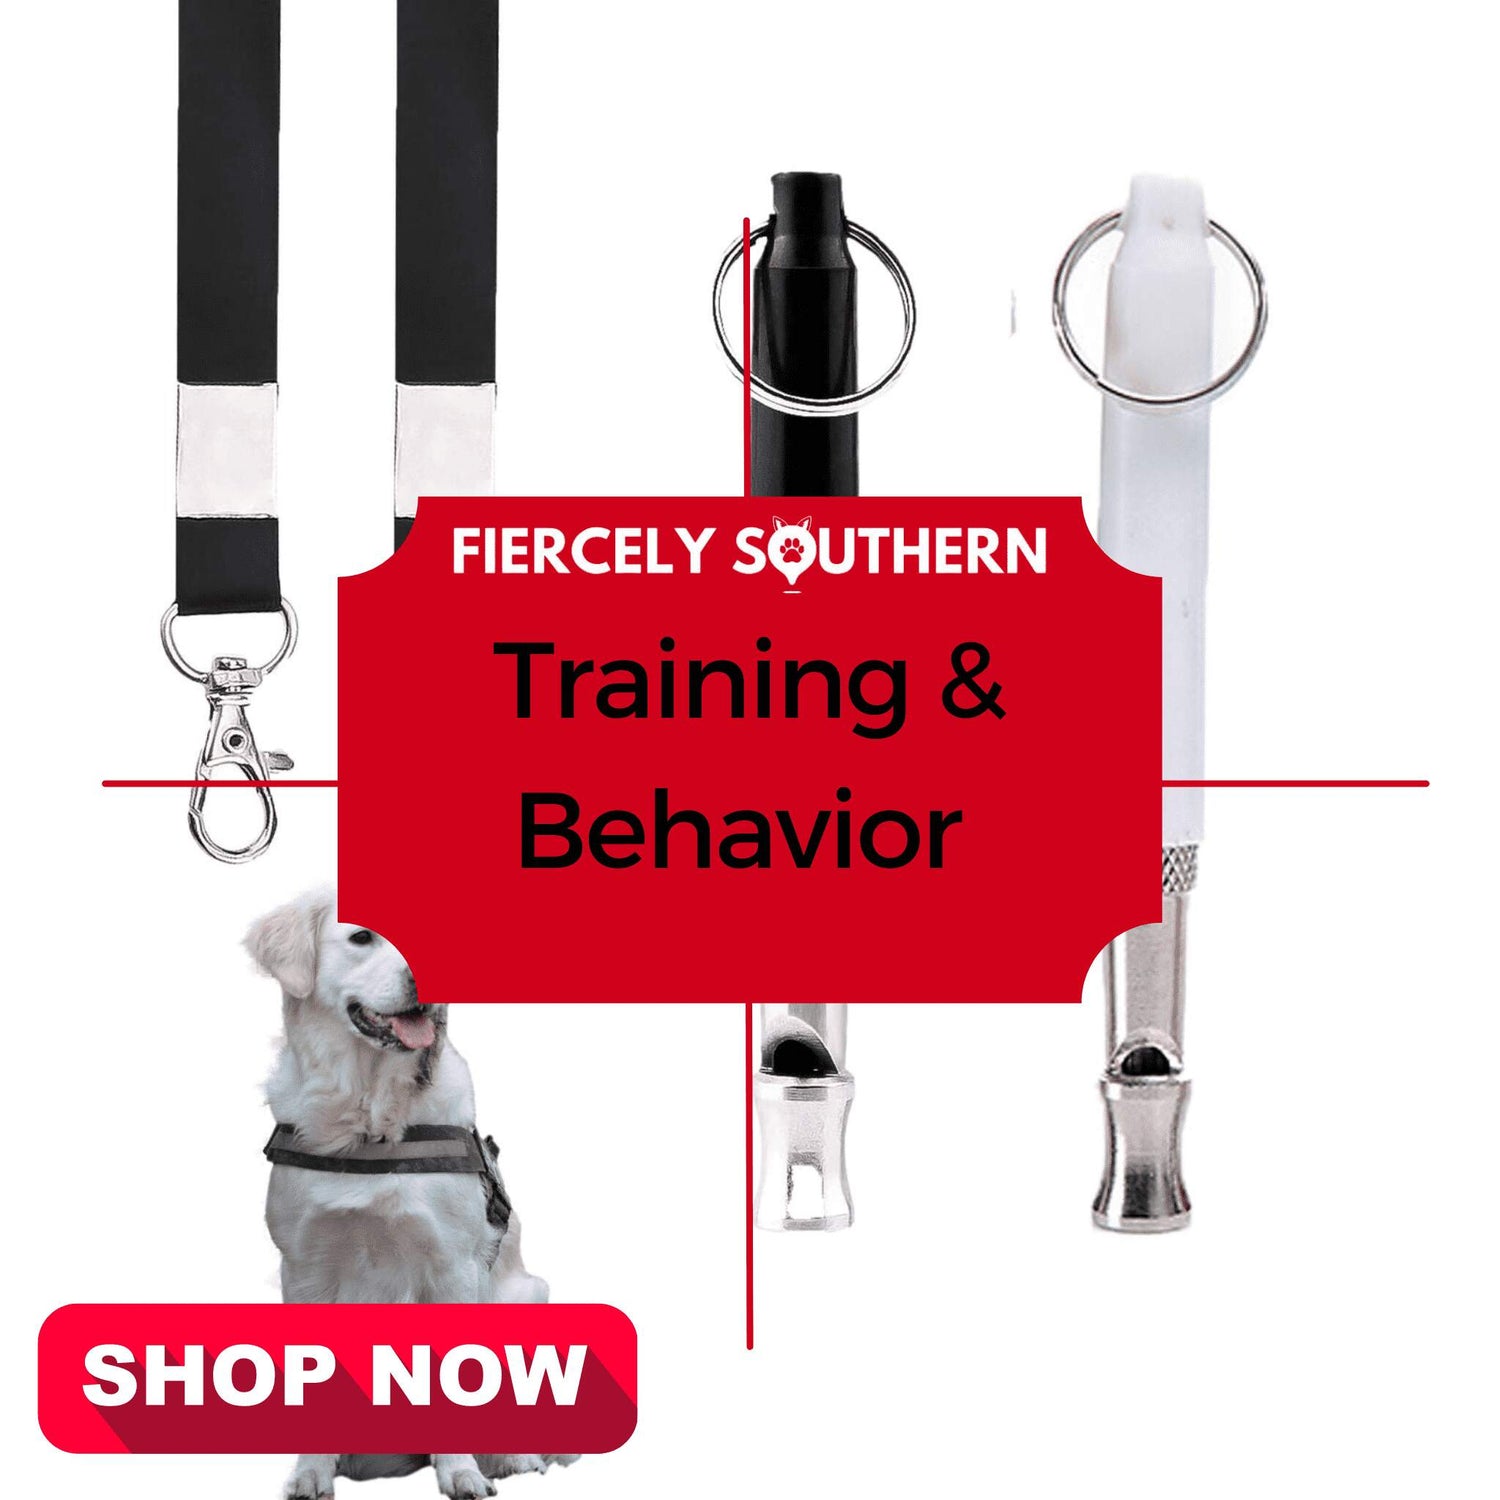 Training & Behavior - Fiercely Southern